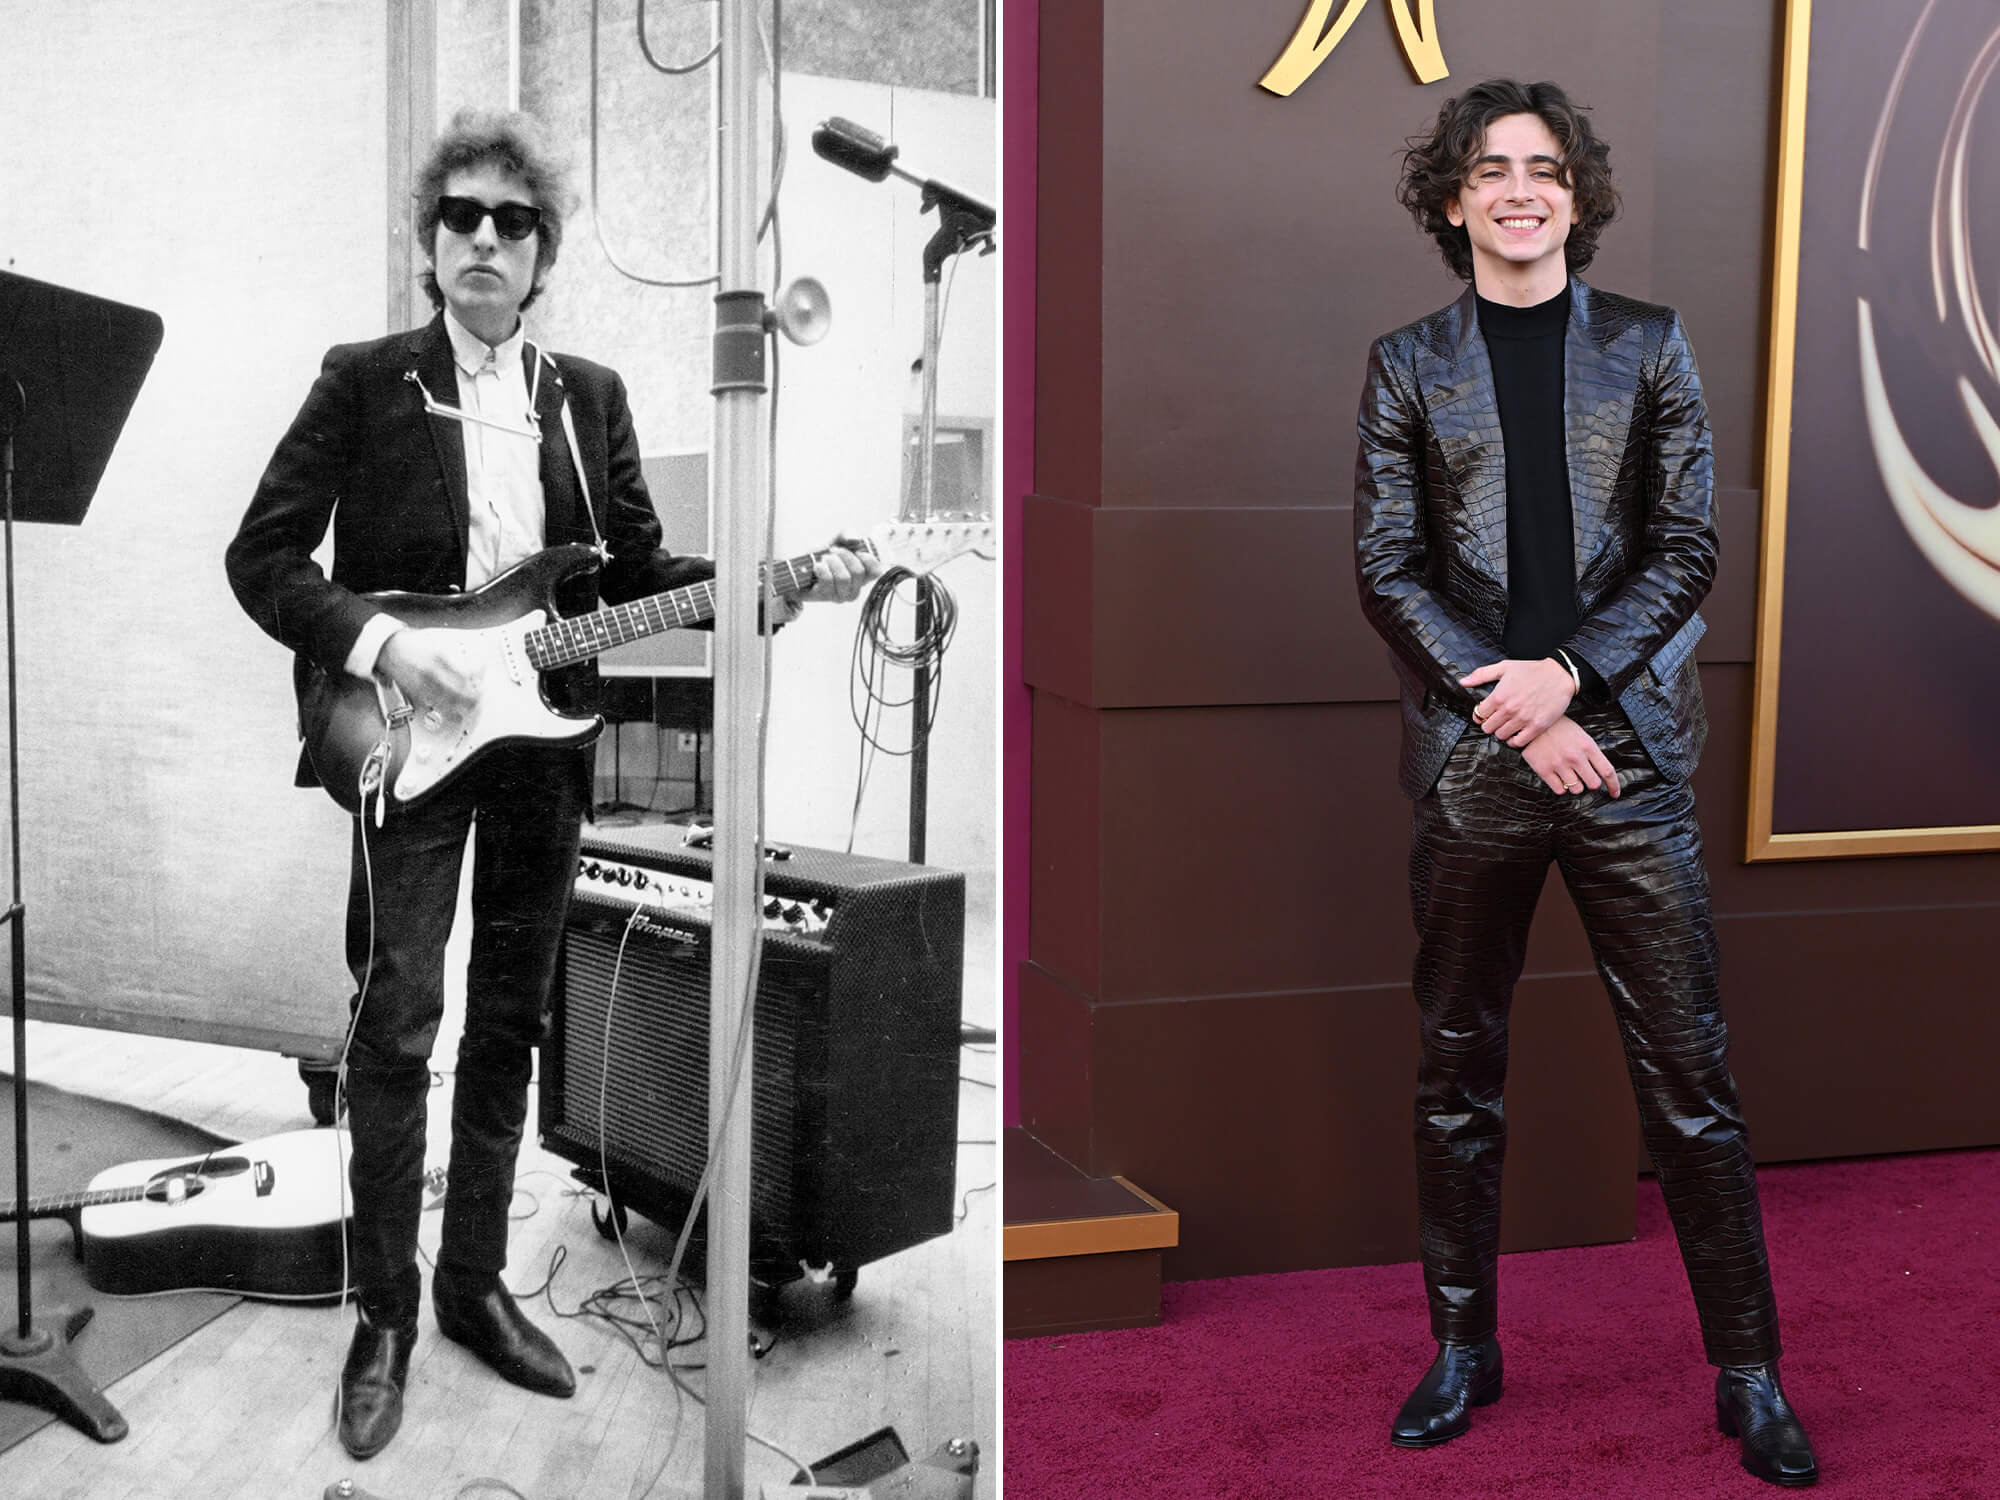 Bob Dylan (left) in the studio holding a Strat. He is pictured in black and white, is wearing shades and a smart outfit. Timothee Chalamet (right) at a red carpet event for his film, Wonka. He is smiling widely and wears and an all-black suit.